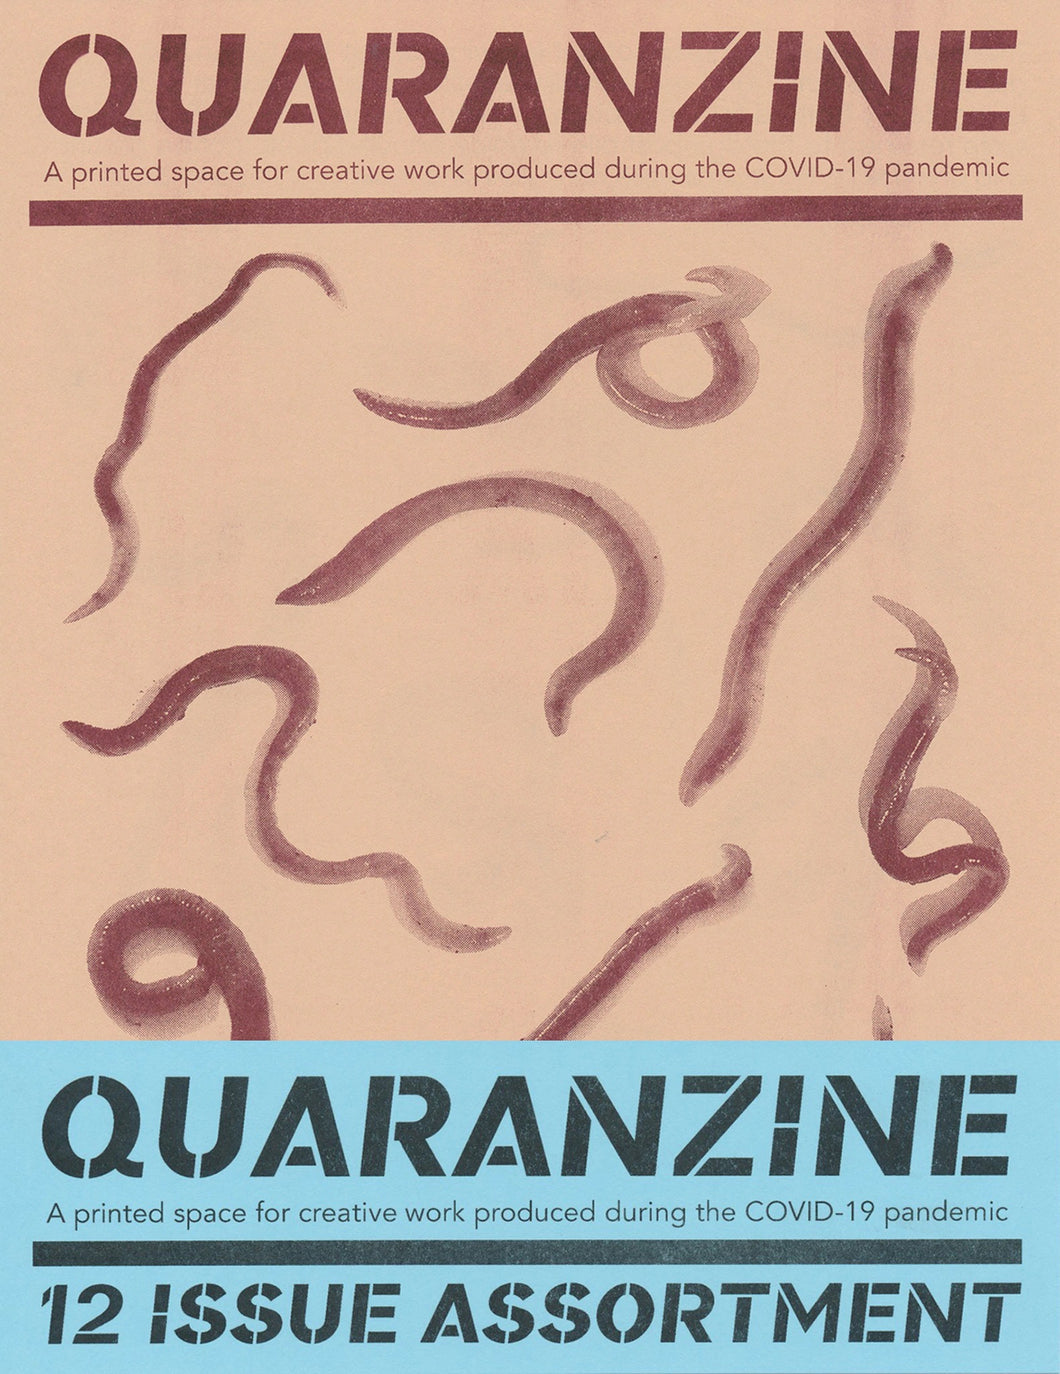 Quaranzine: A Printed Space for Creative Work Produced During the COVID-19 Pandemic (12 Issue Assortment)